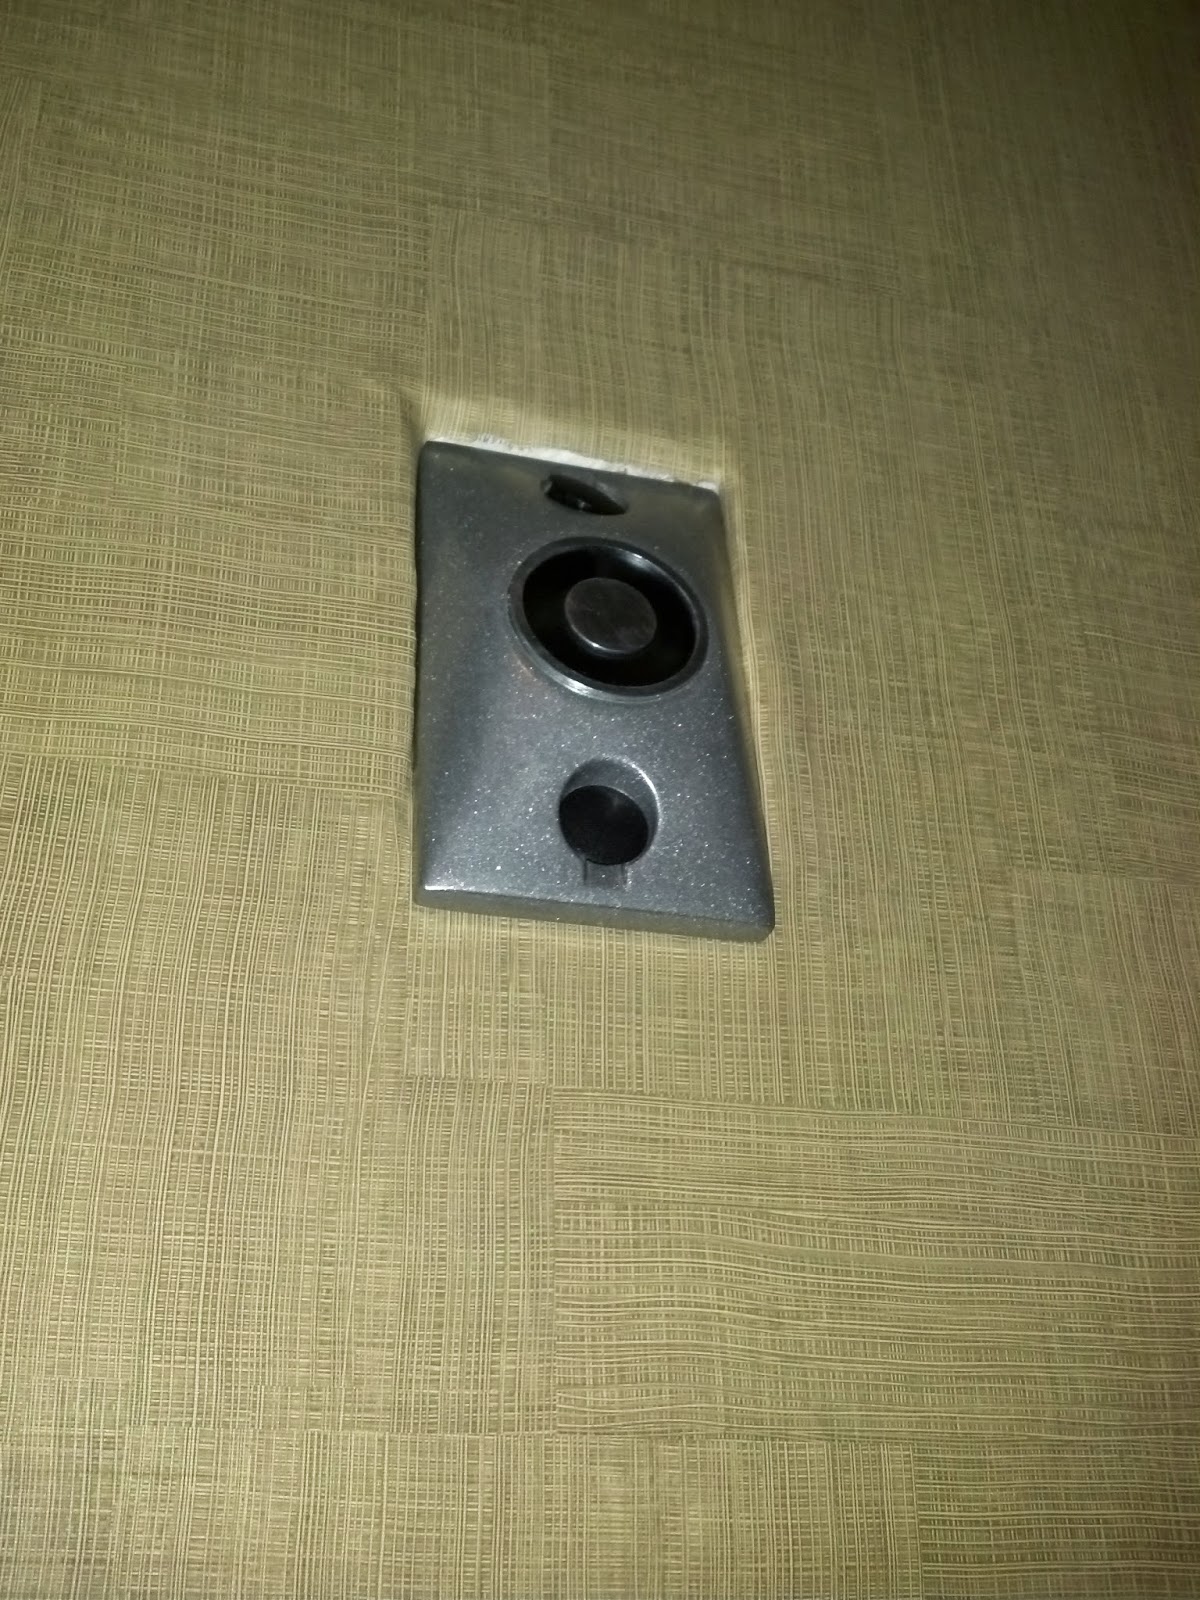 Fire Alarm Door Holder Pushed into Wall